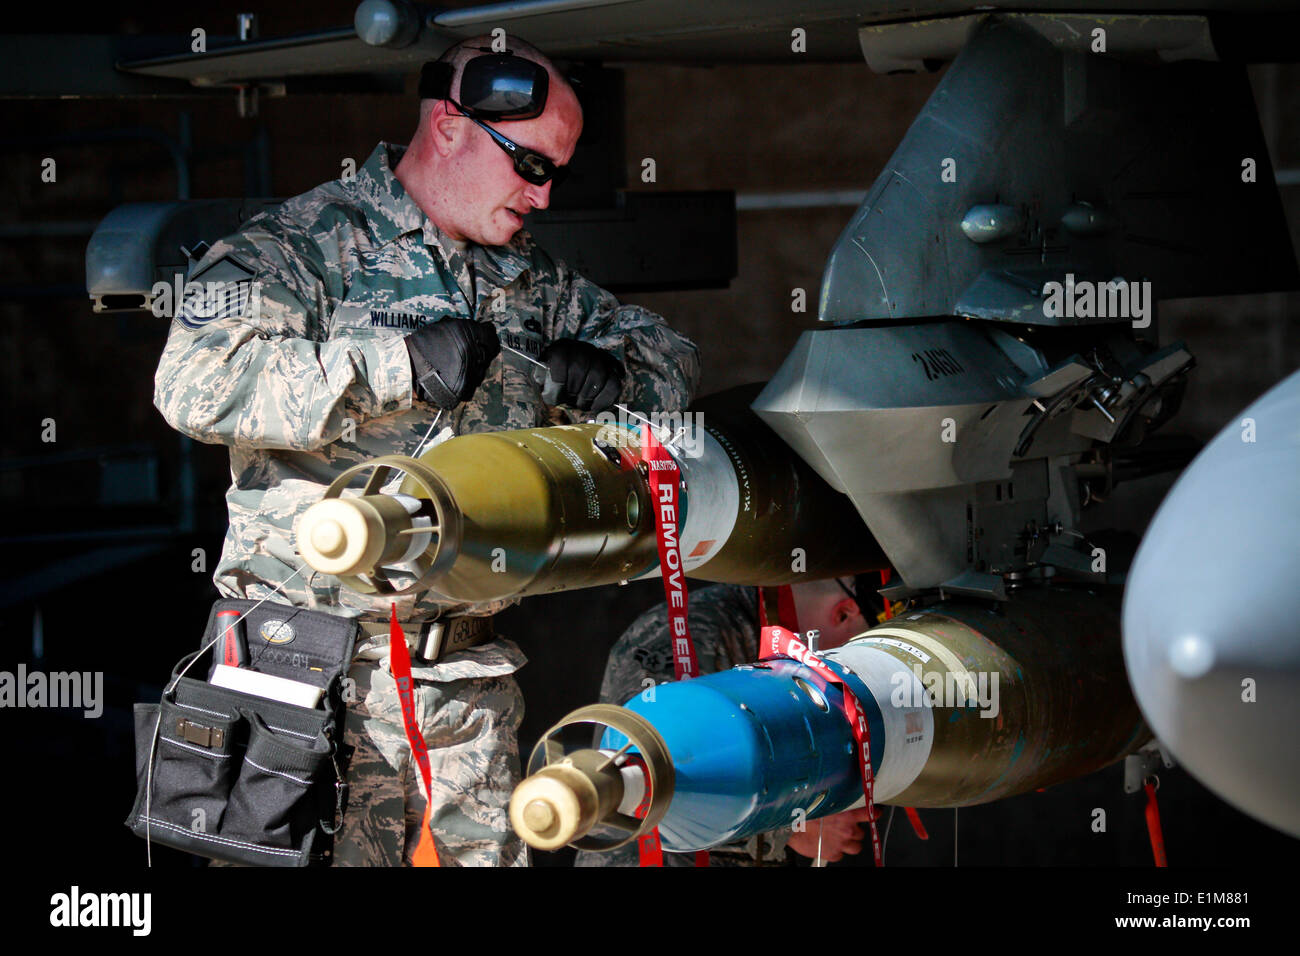 U.S. Air Force Master Sgt. Keith Williams, an aircraft armament systems specialist assigned to the 177th Aircraft Maintenance S Stock Photo